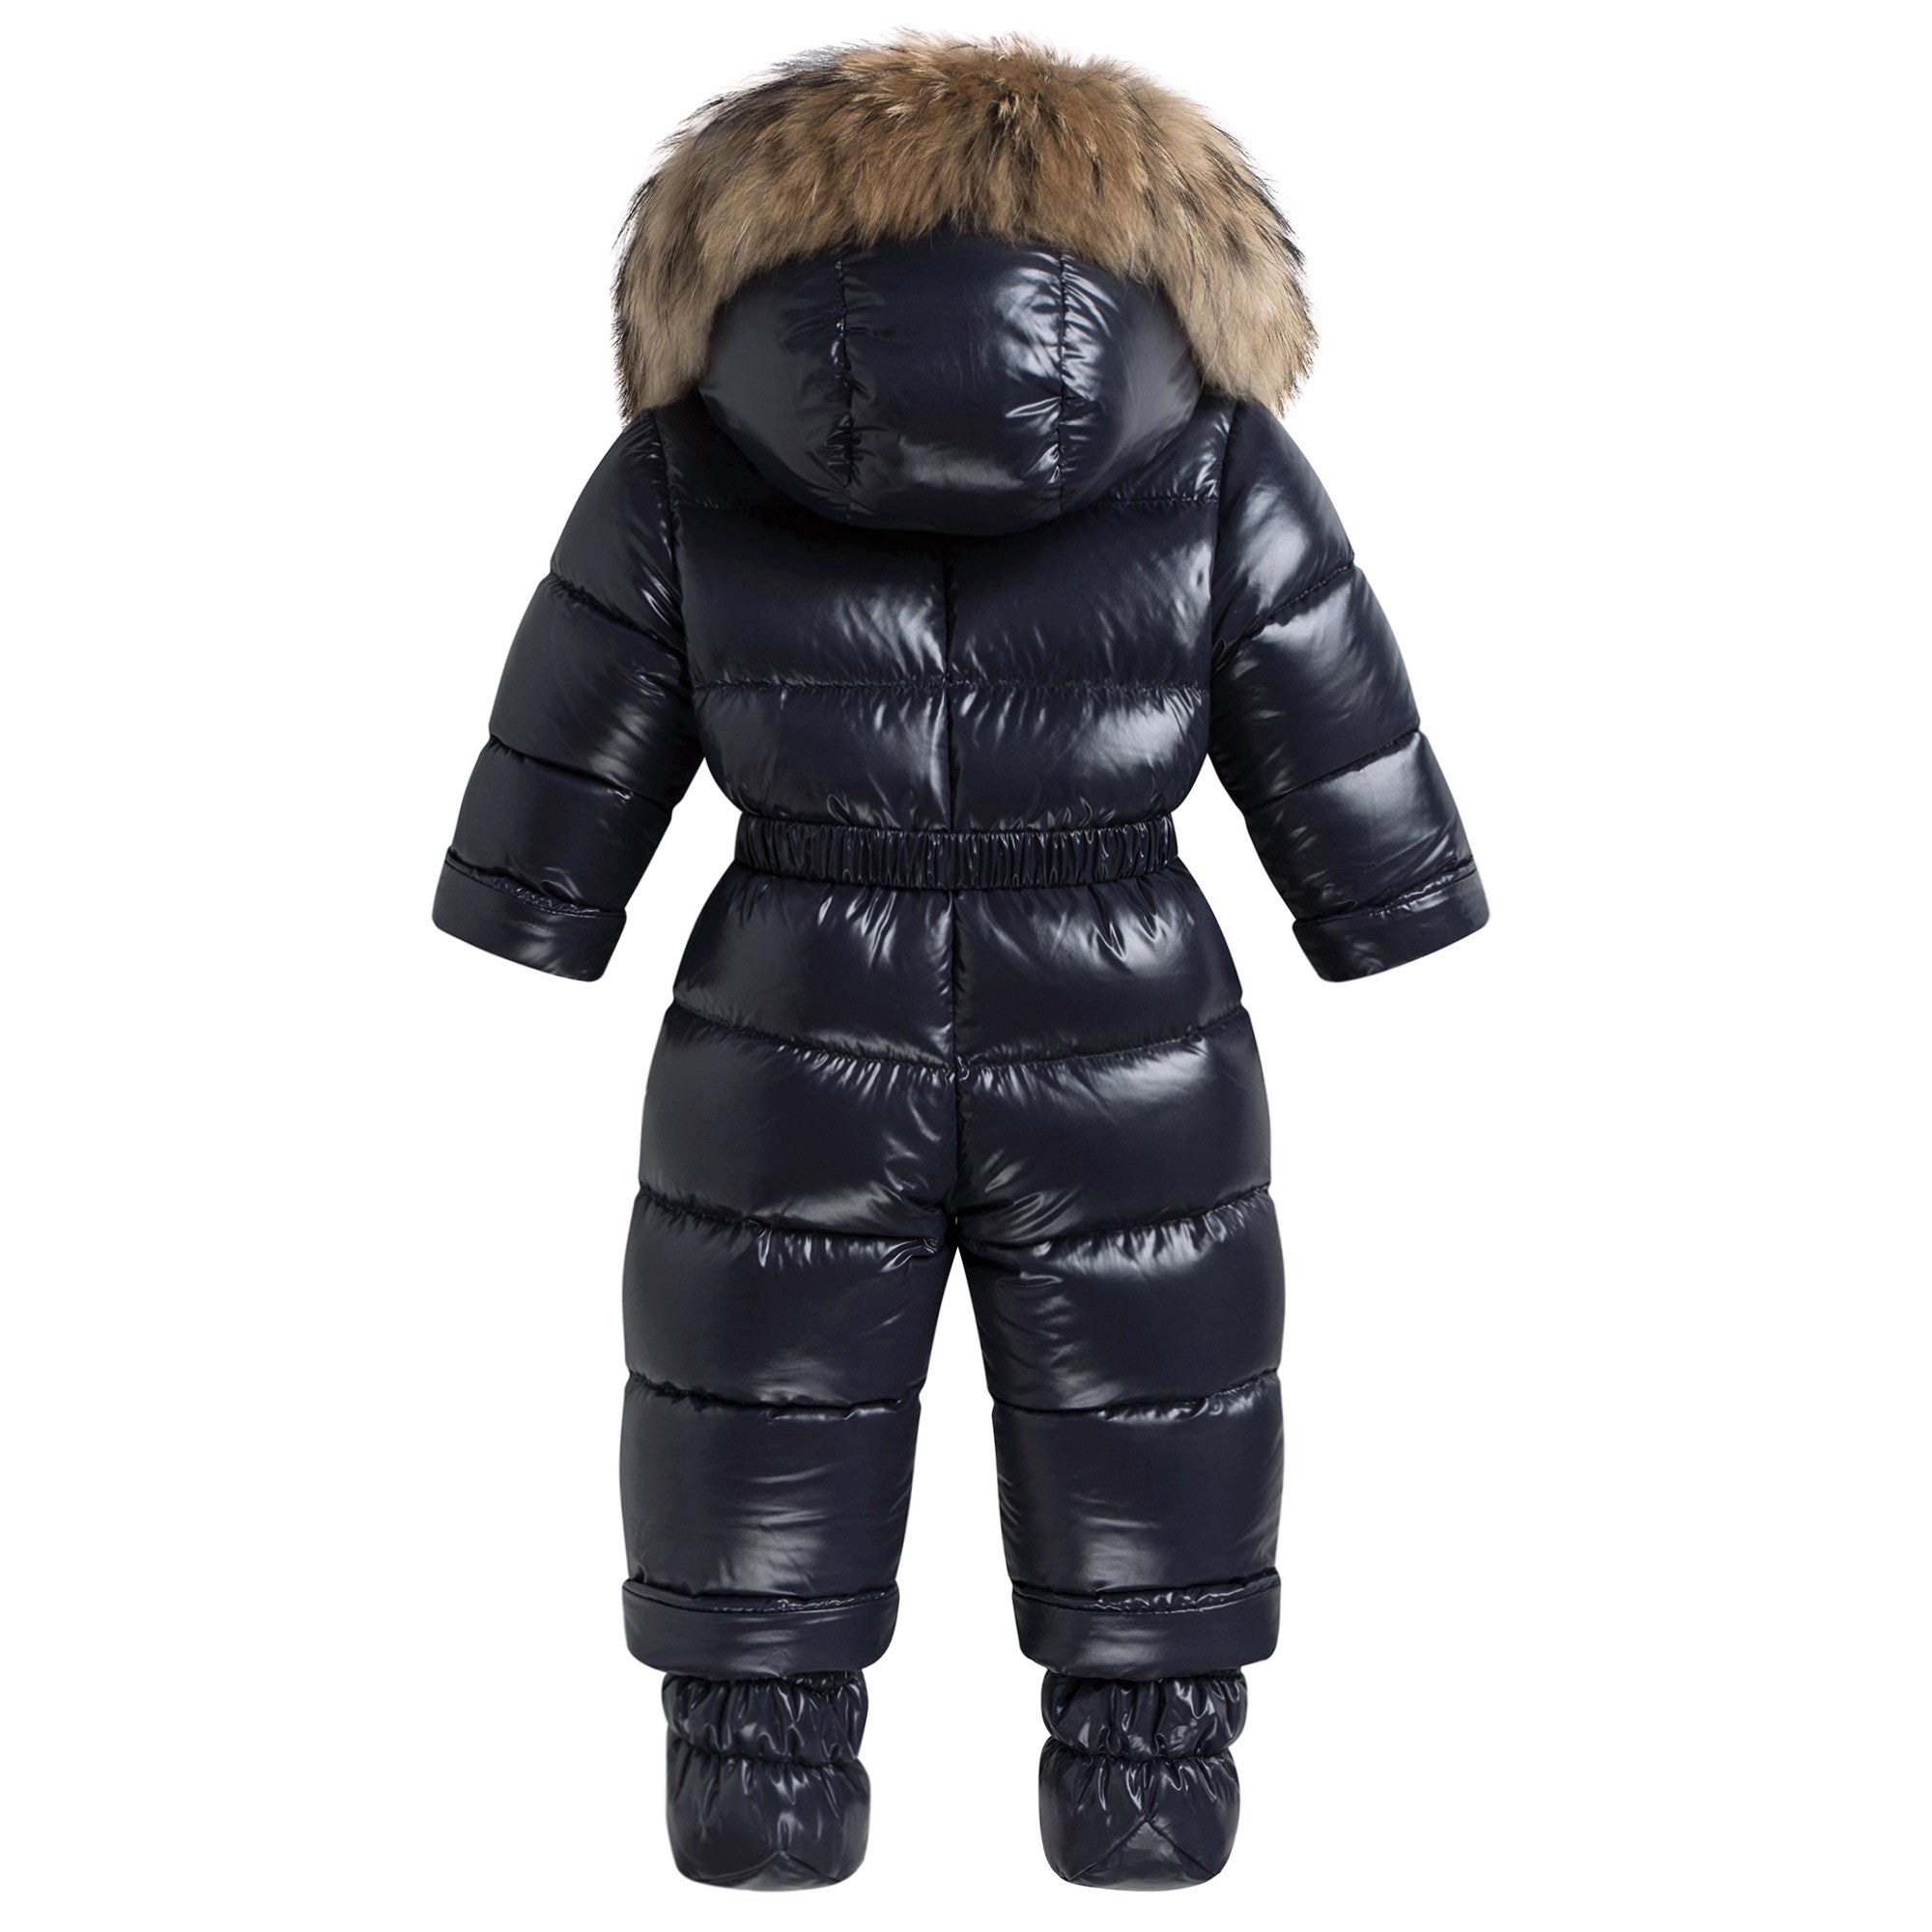 Baby Navy Blue "New Crystal" Snowsuit